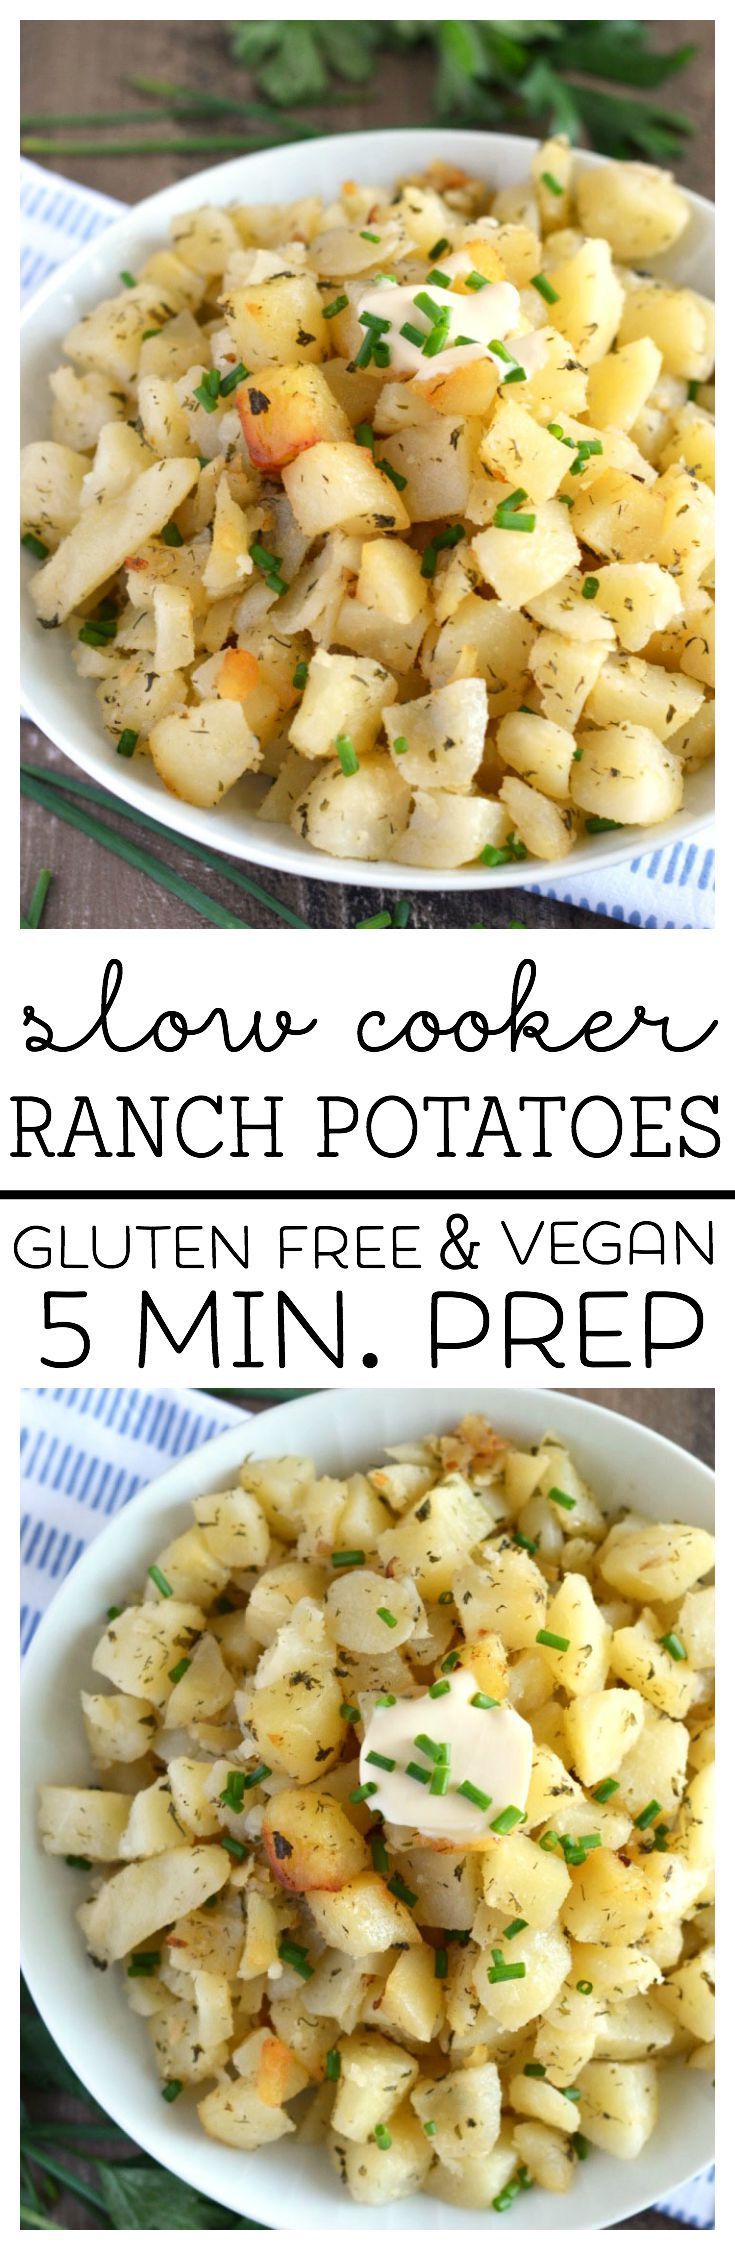 Slow Cooker Ranch Potatoes (gluten free and vegan) with only 5 minutes prep! From What The Fork Food Blog | @WhatTheForkBlog |